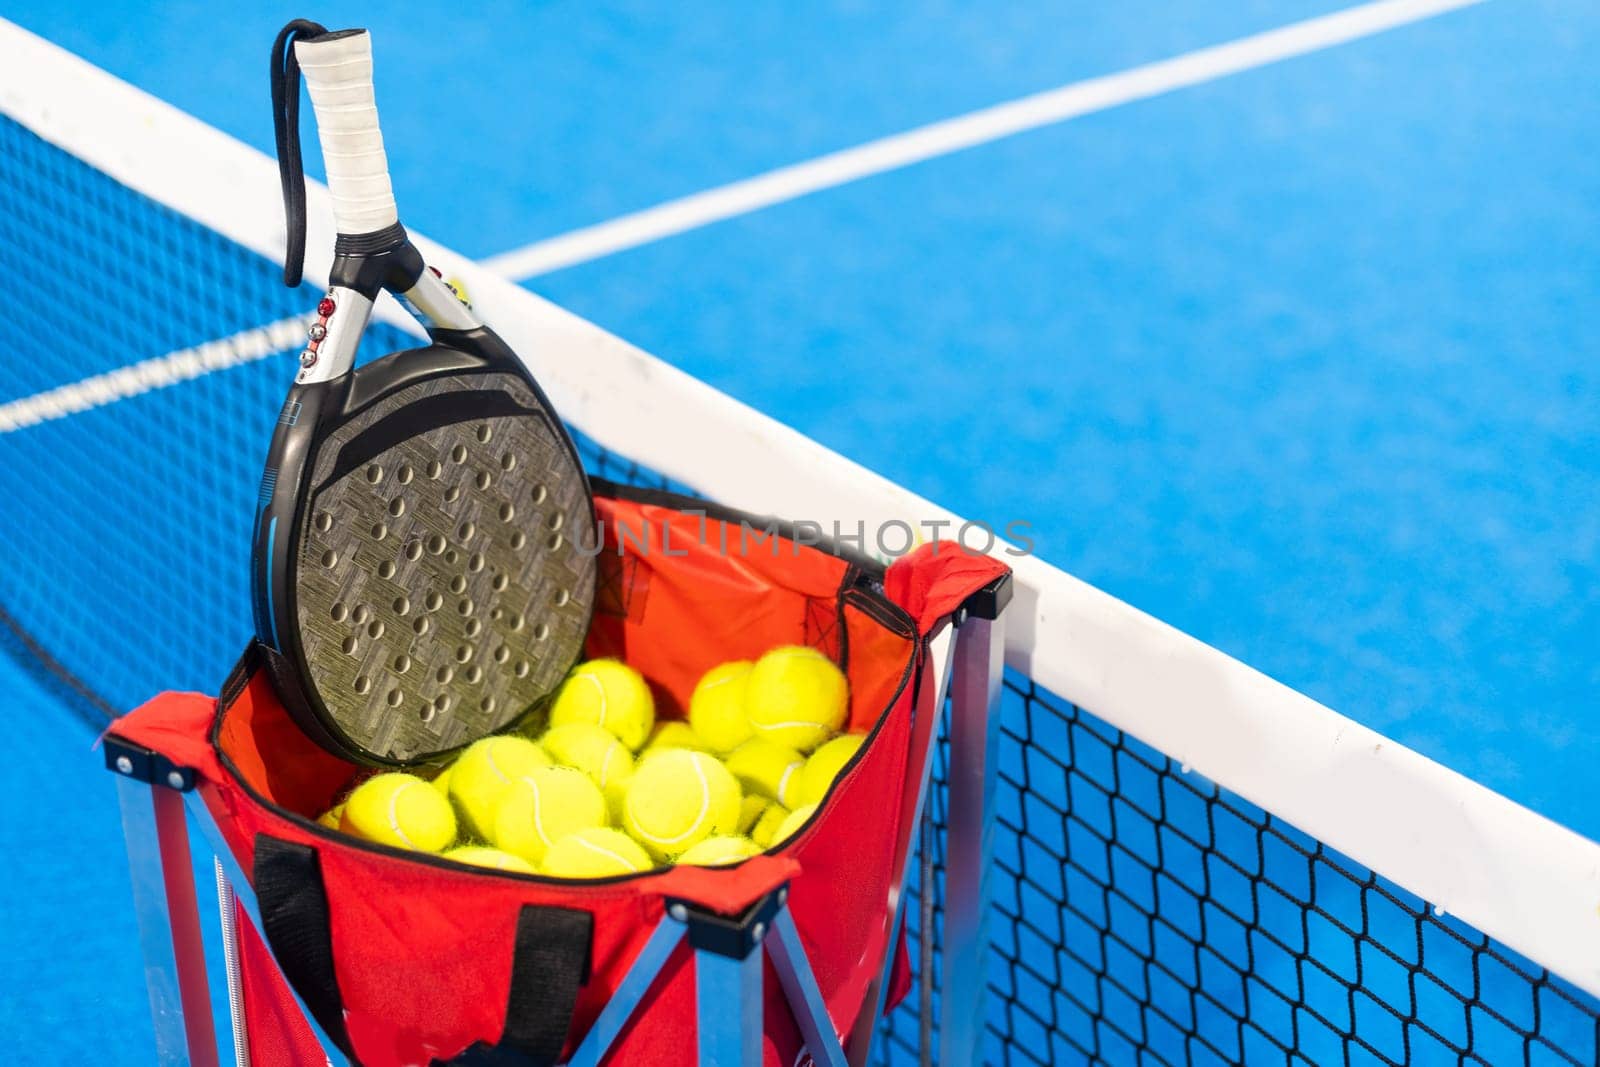 Paddle tennis rackets, balls and basket in court still life. High quality photo